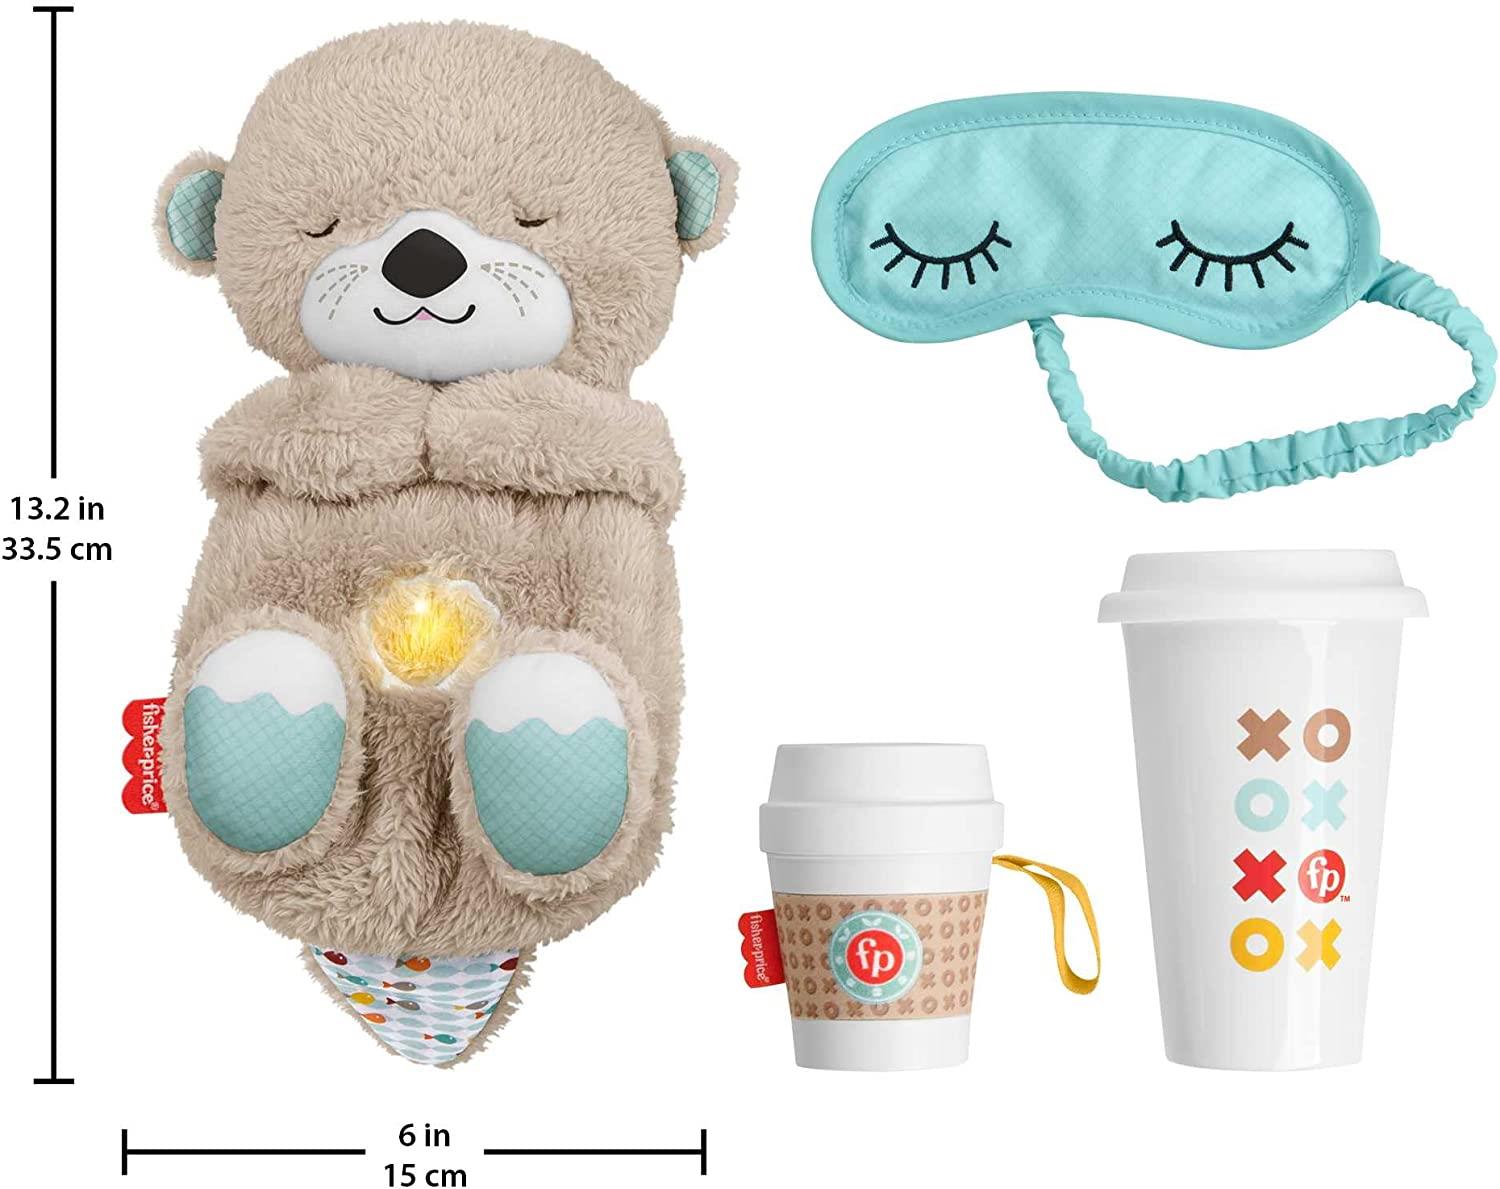 Fisher-Price Soothe, Play & Sip Gift Set for Newborn Baby by Fisher Price - The Magic Toy Shop